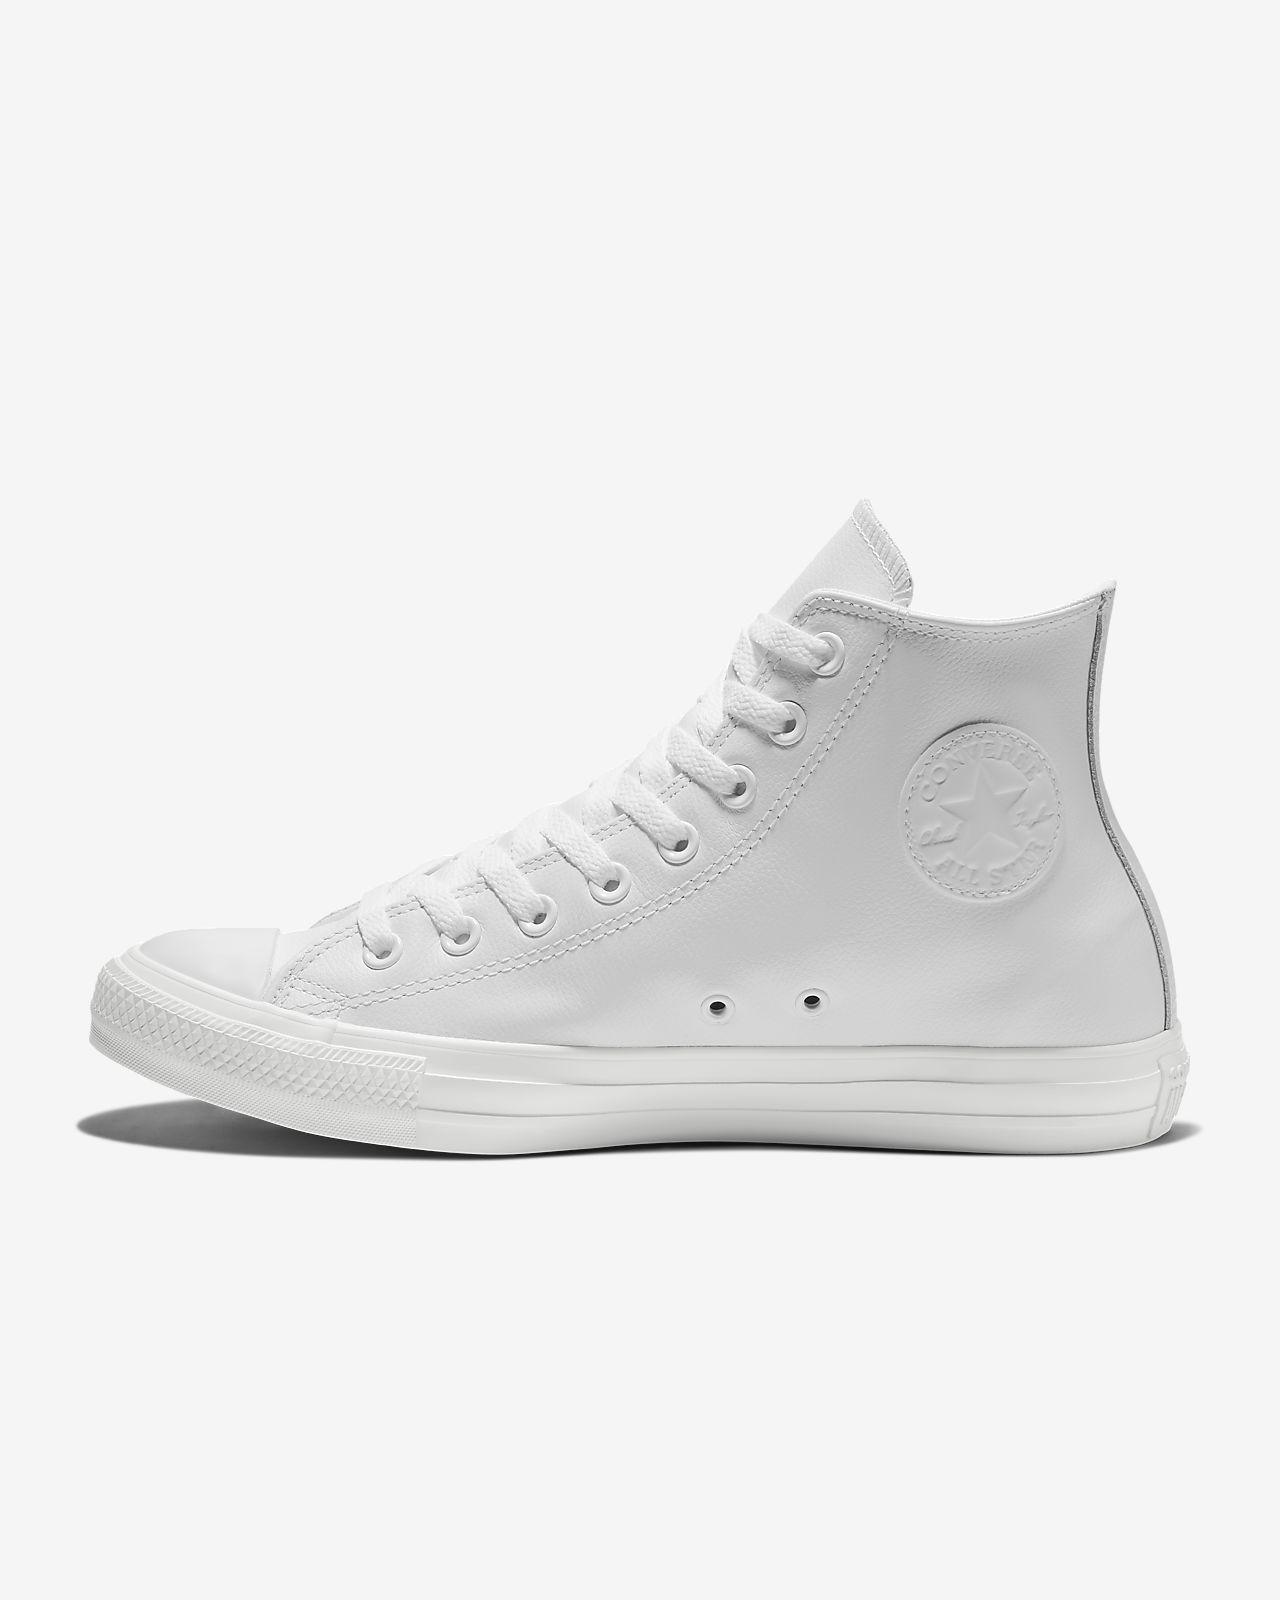 Converse Chuck Taylor All Star Leather High Top Unisex Shoe. Nike.com